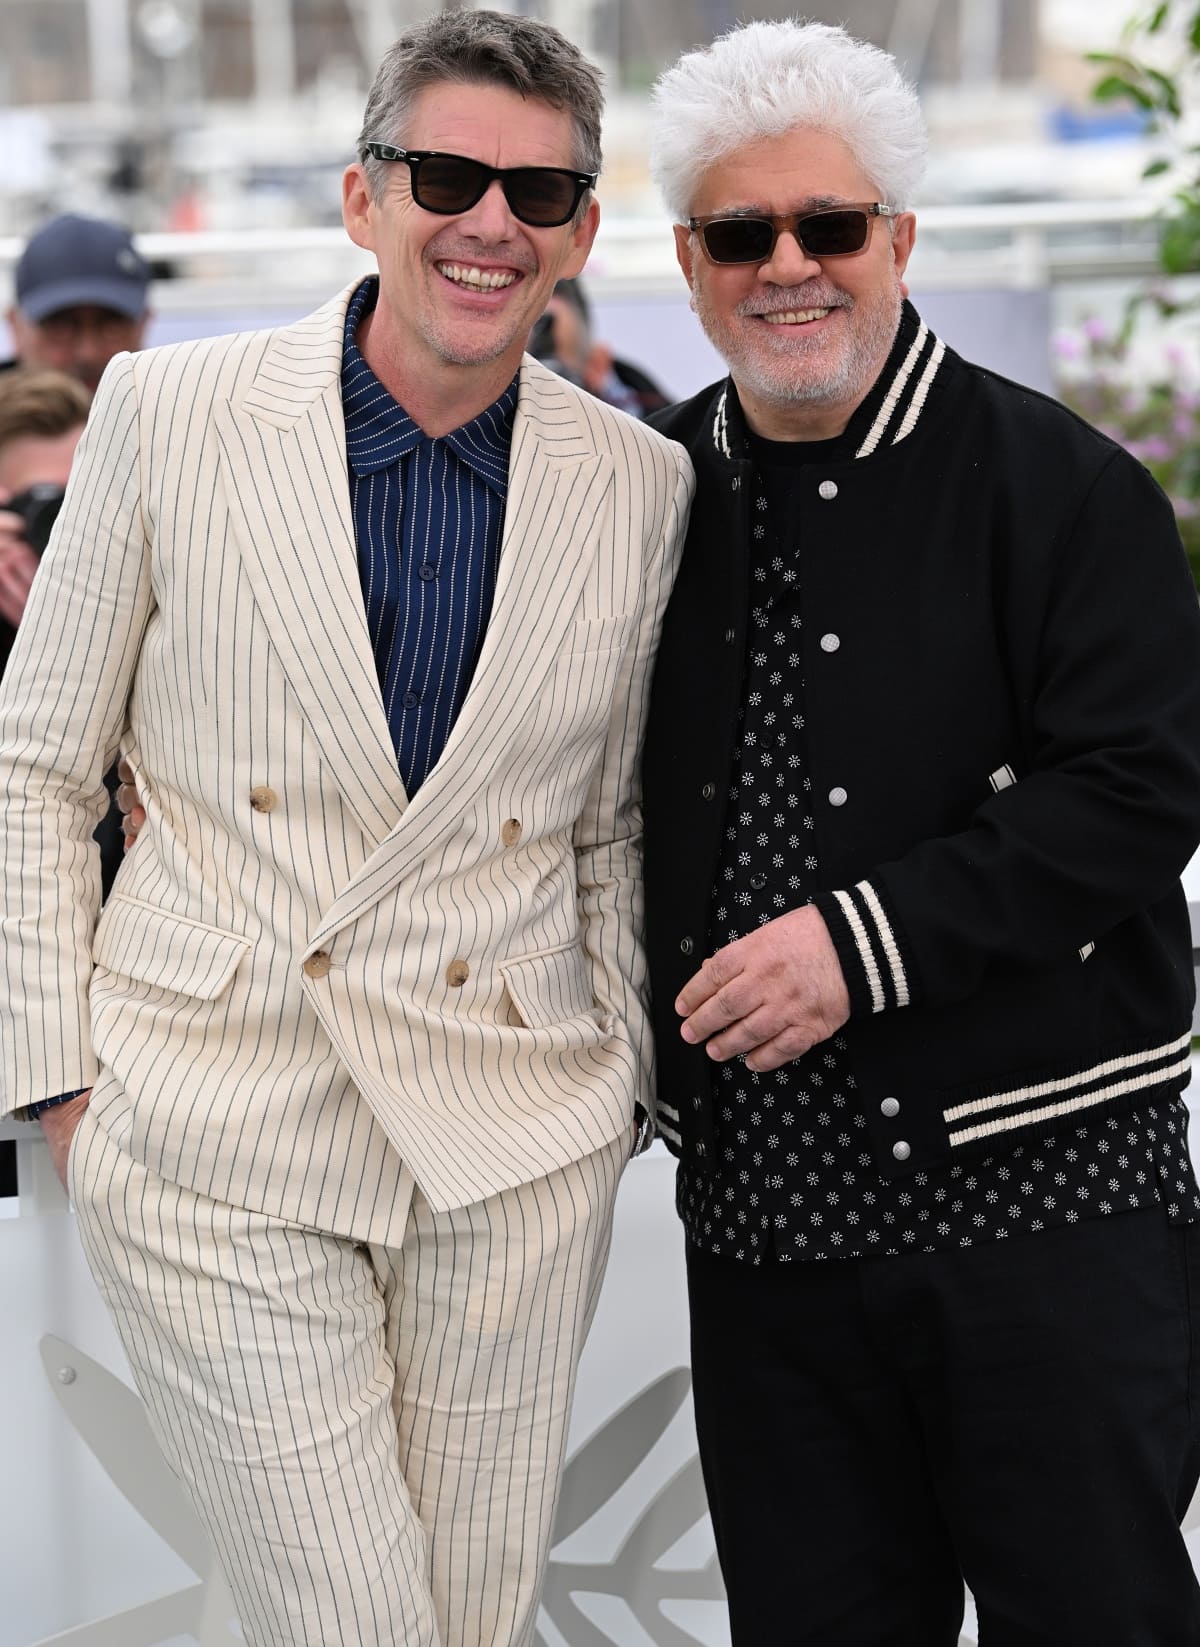 Ethan Hawke and Pedro Almodovar at the Strange Way of Life photocall during the 76th Cannes Film Festival